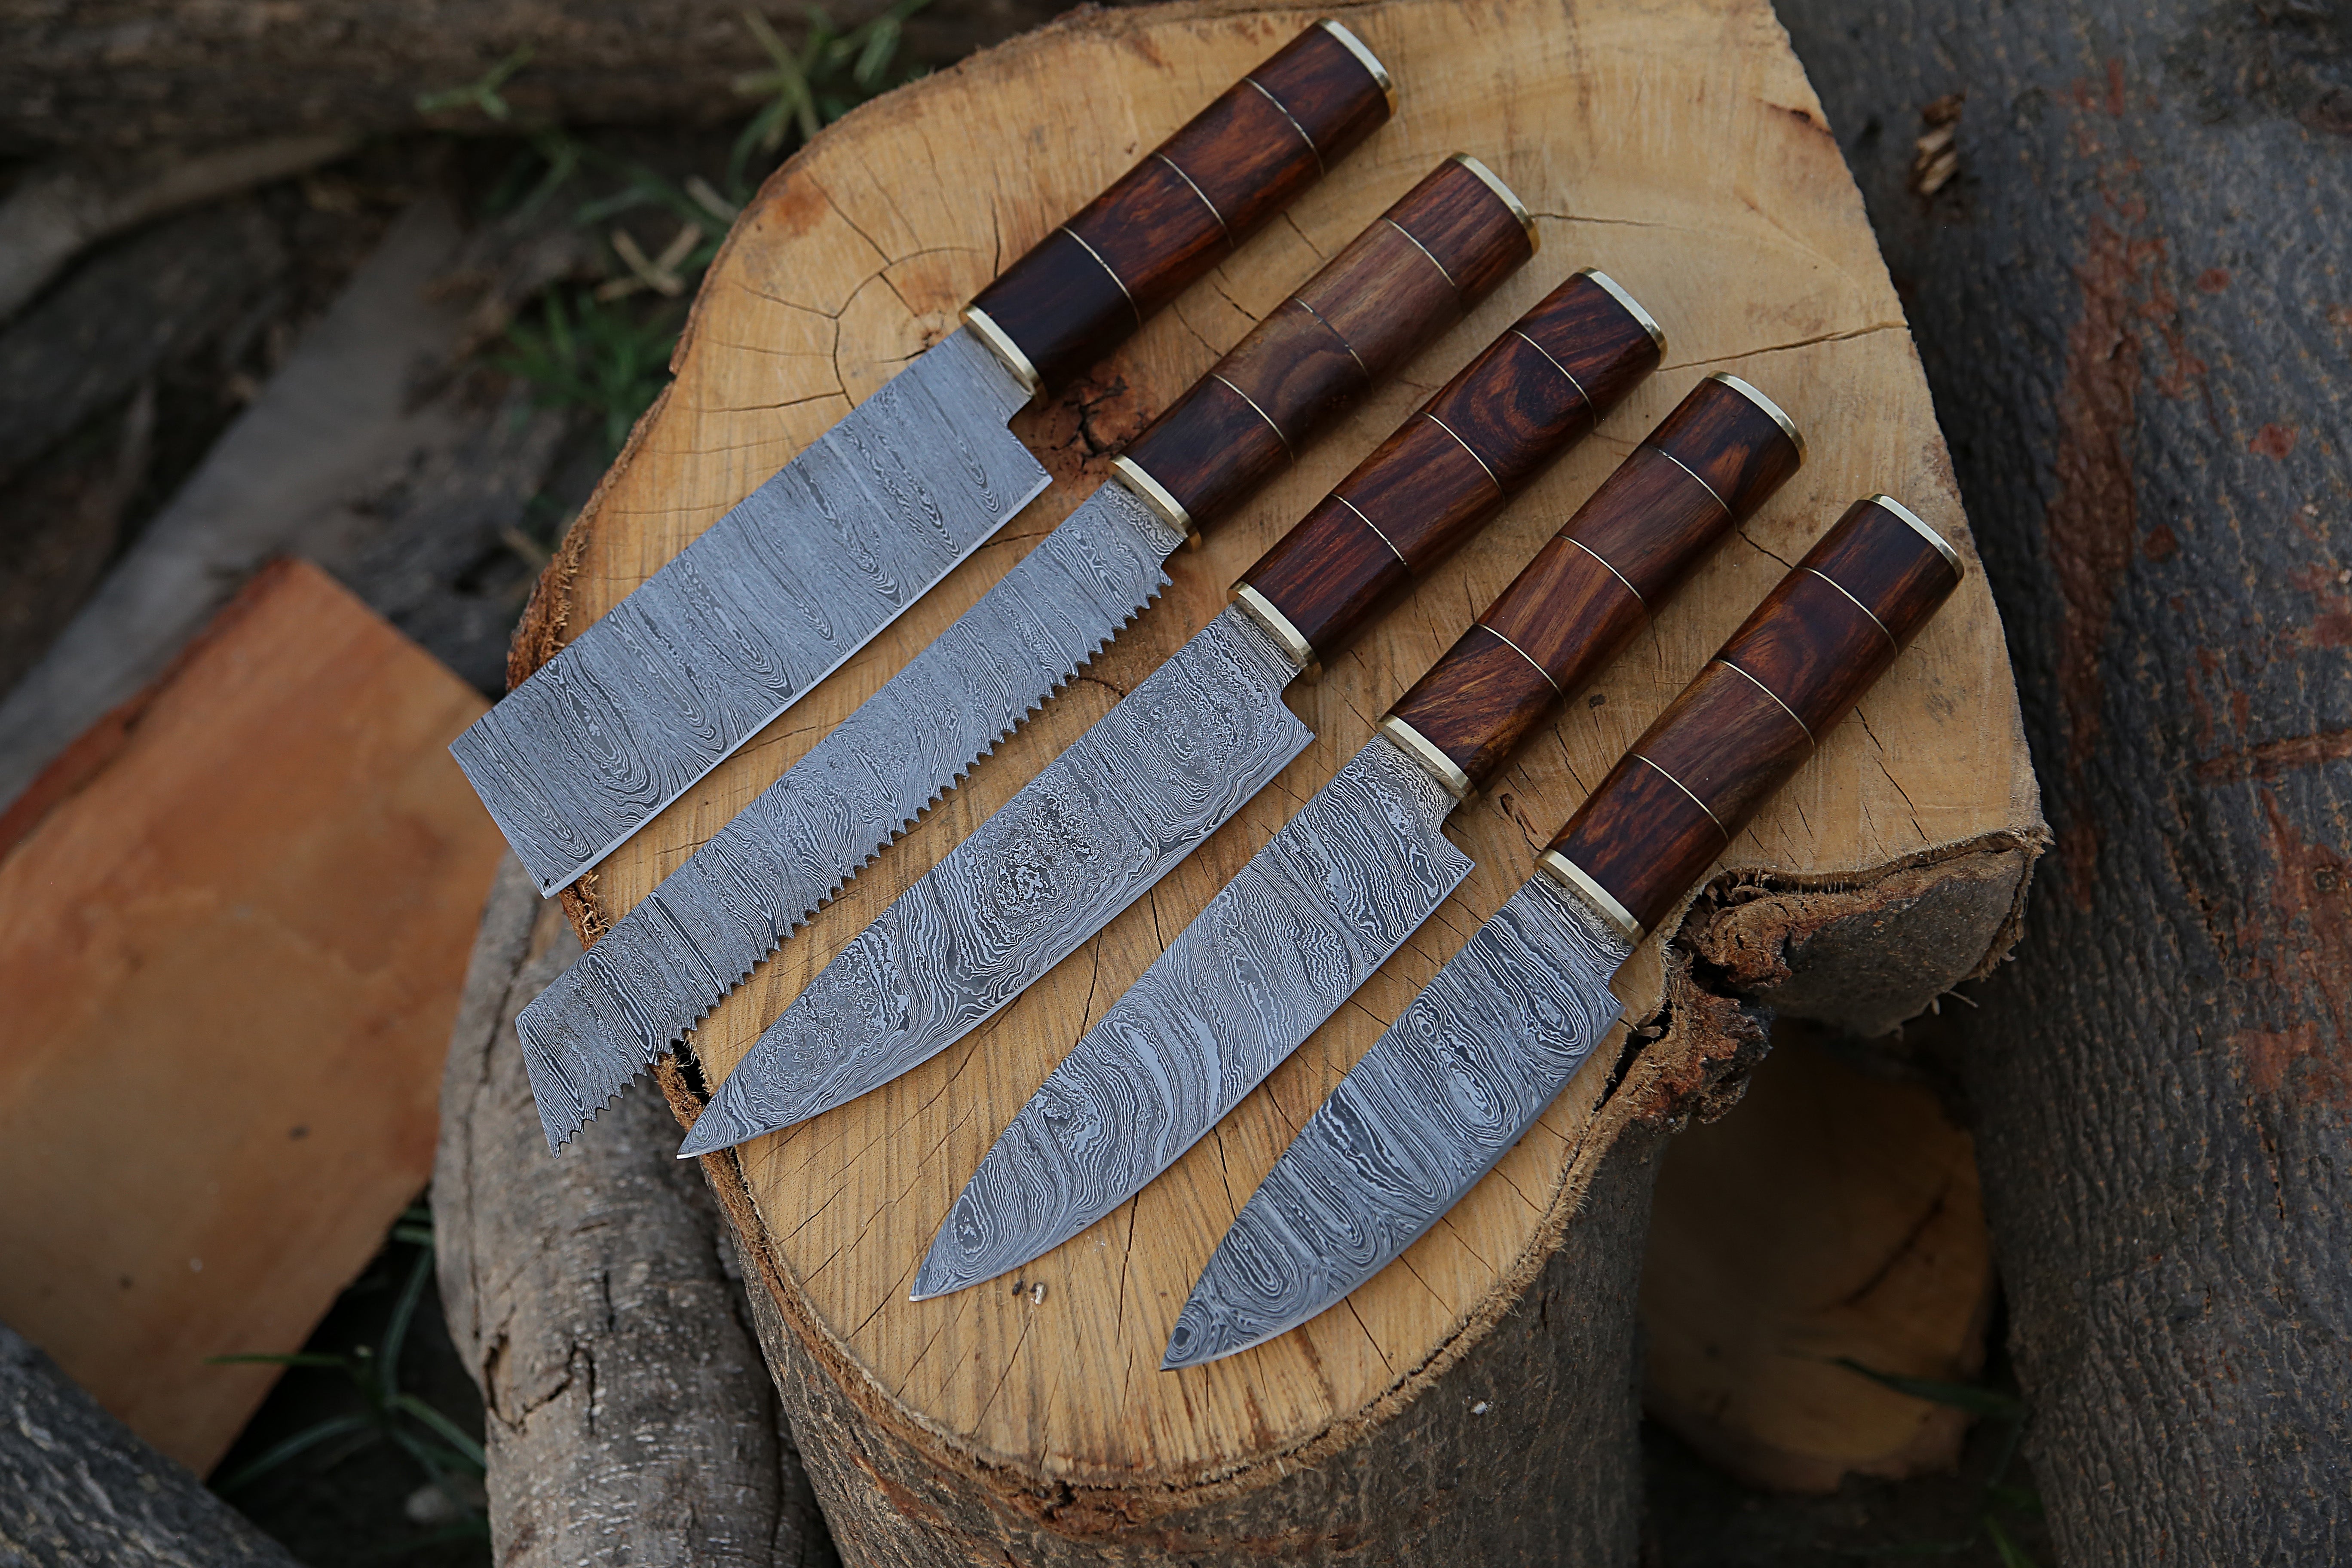 Custom Made Damascus Steel Kitchen Knife Rosewood Handle Handmade Chef knife Set Of 5 PCS With Leather Kit.